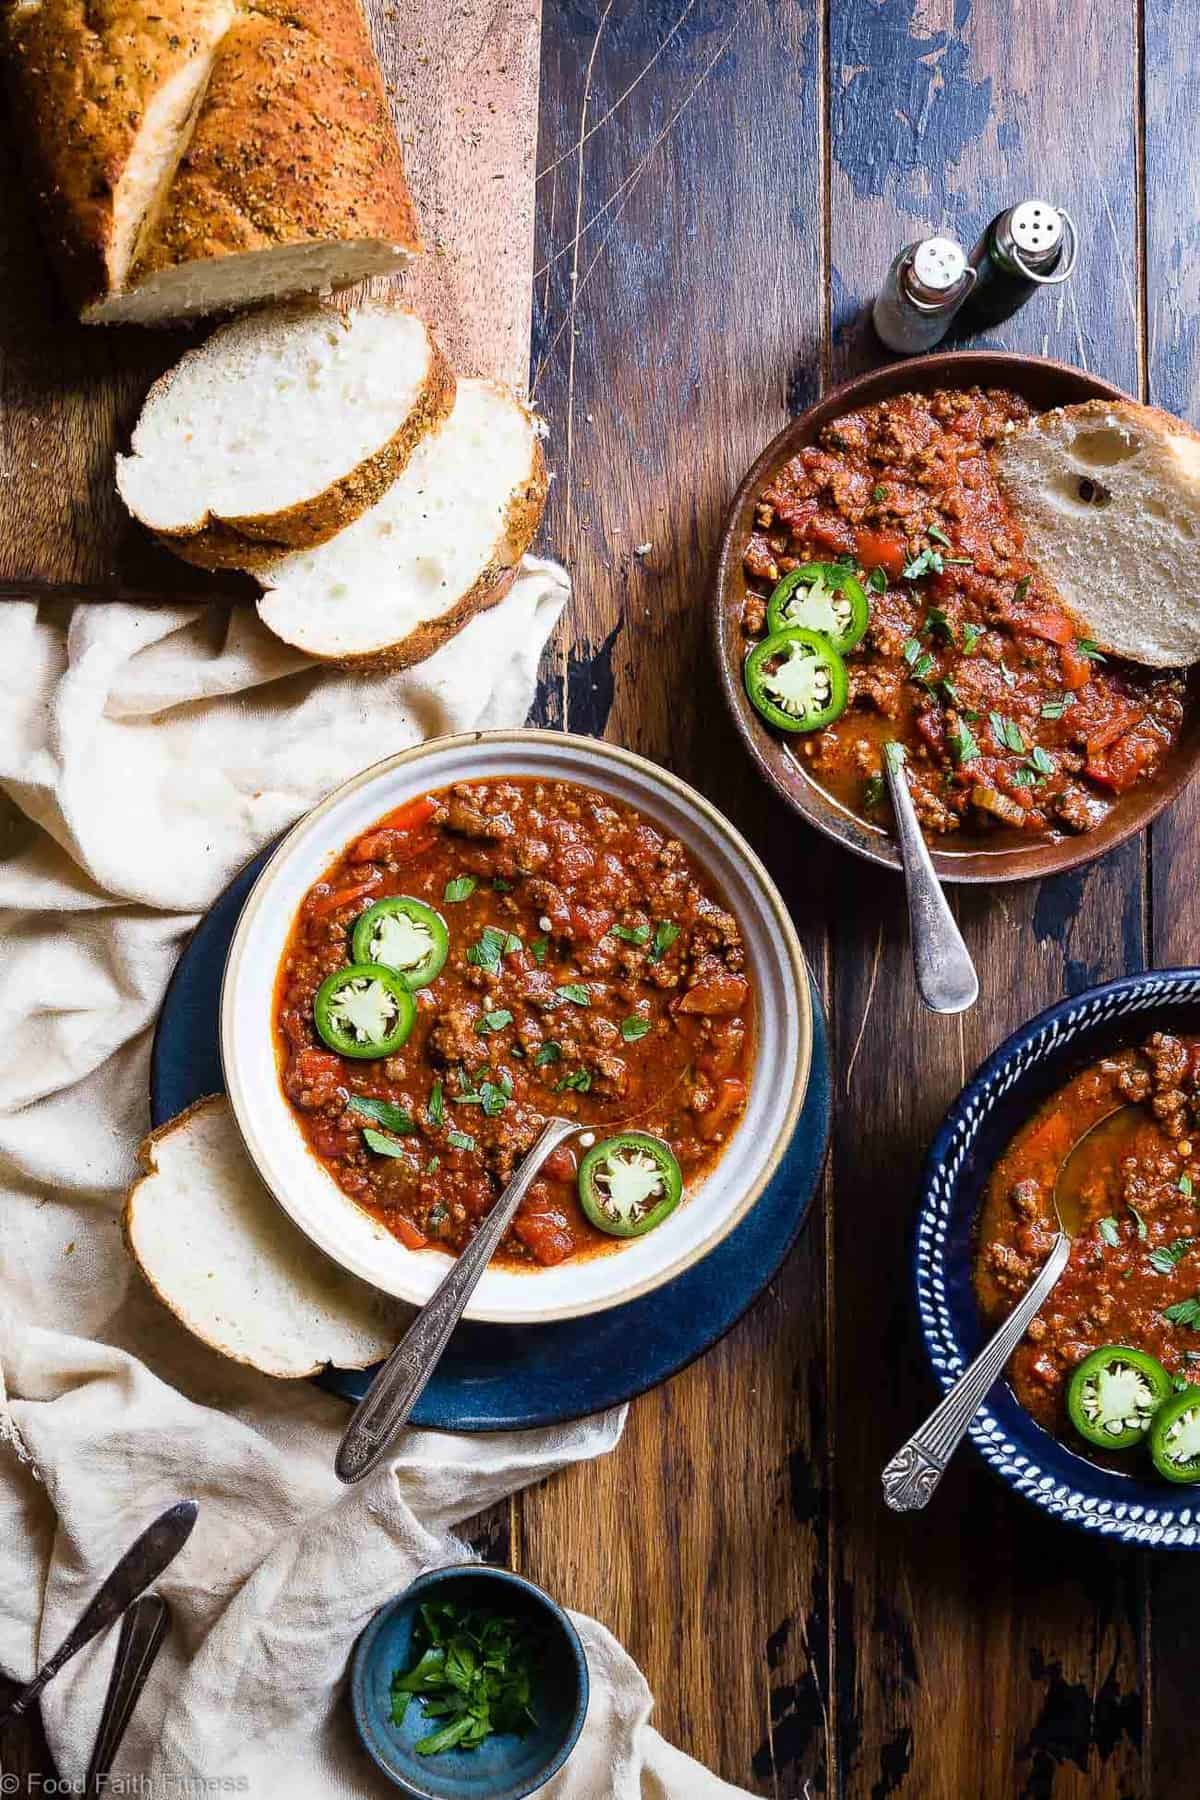 Instant Pot Whole30 Keto Low Carb Chili Recipe - This paleo chili recipe is a meat lovers dream! It's the easiest healthy weeknight dinner that the whole family will love and it freezes great for leftovers or meal prep! | #Foodfaithfitness | #Keto #Lowcarb #Paleo #Whole3o #InstantPot